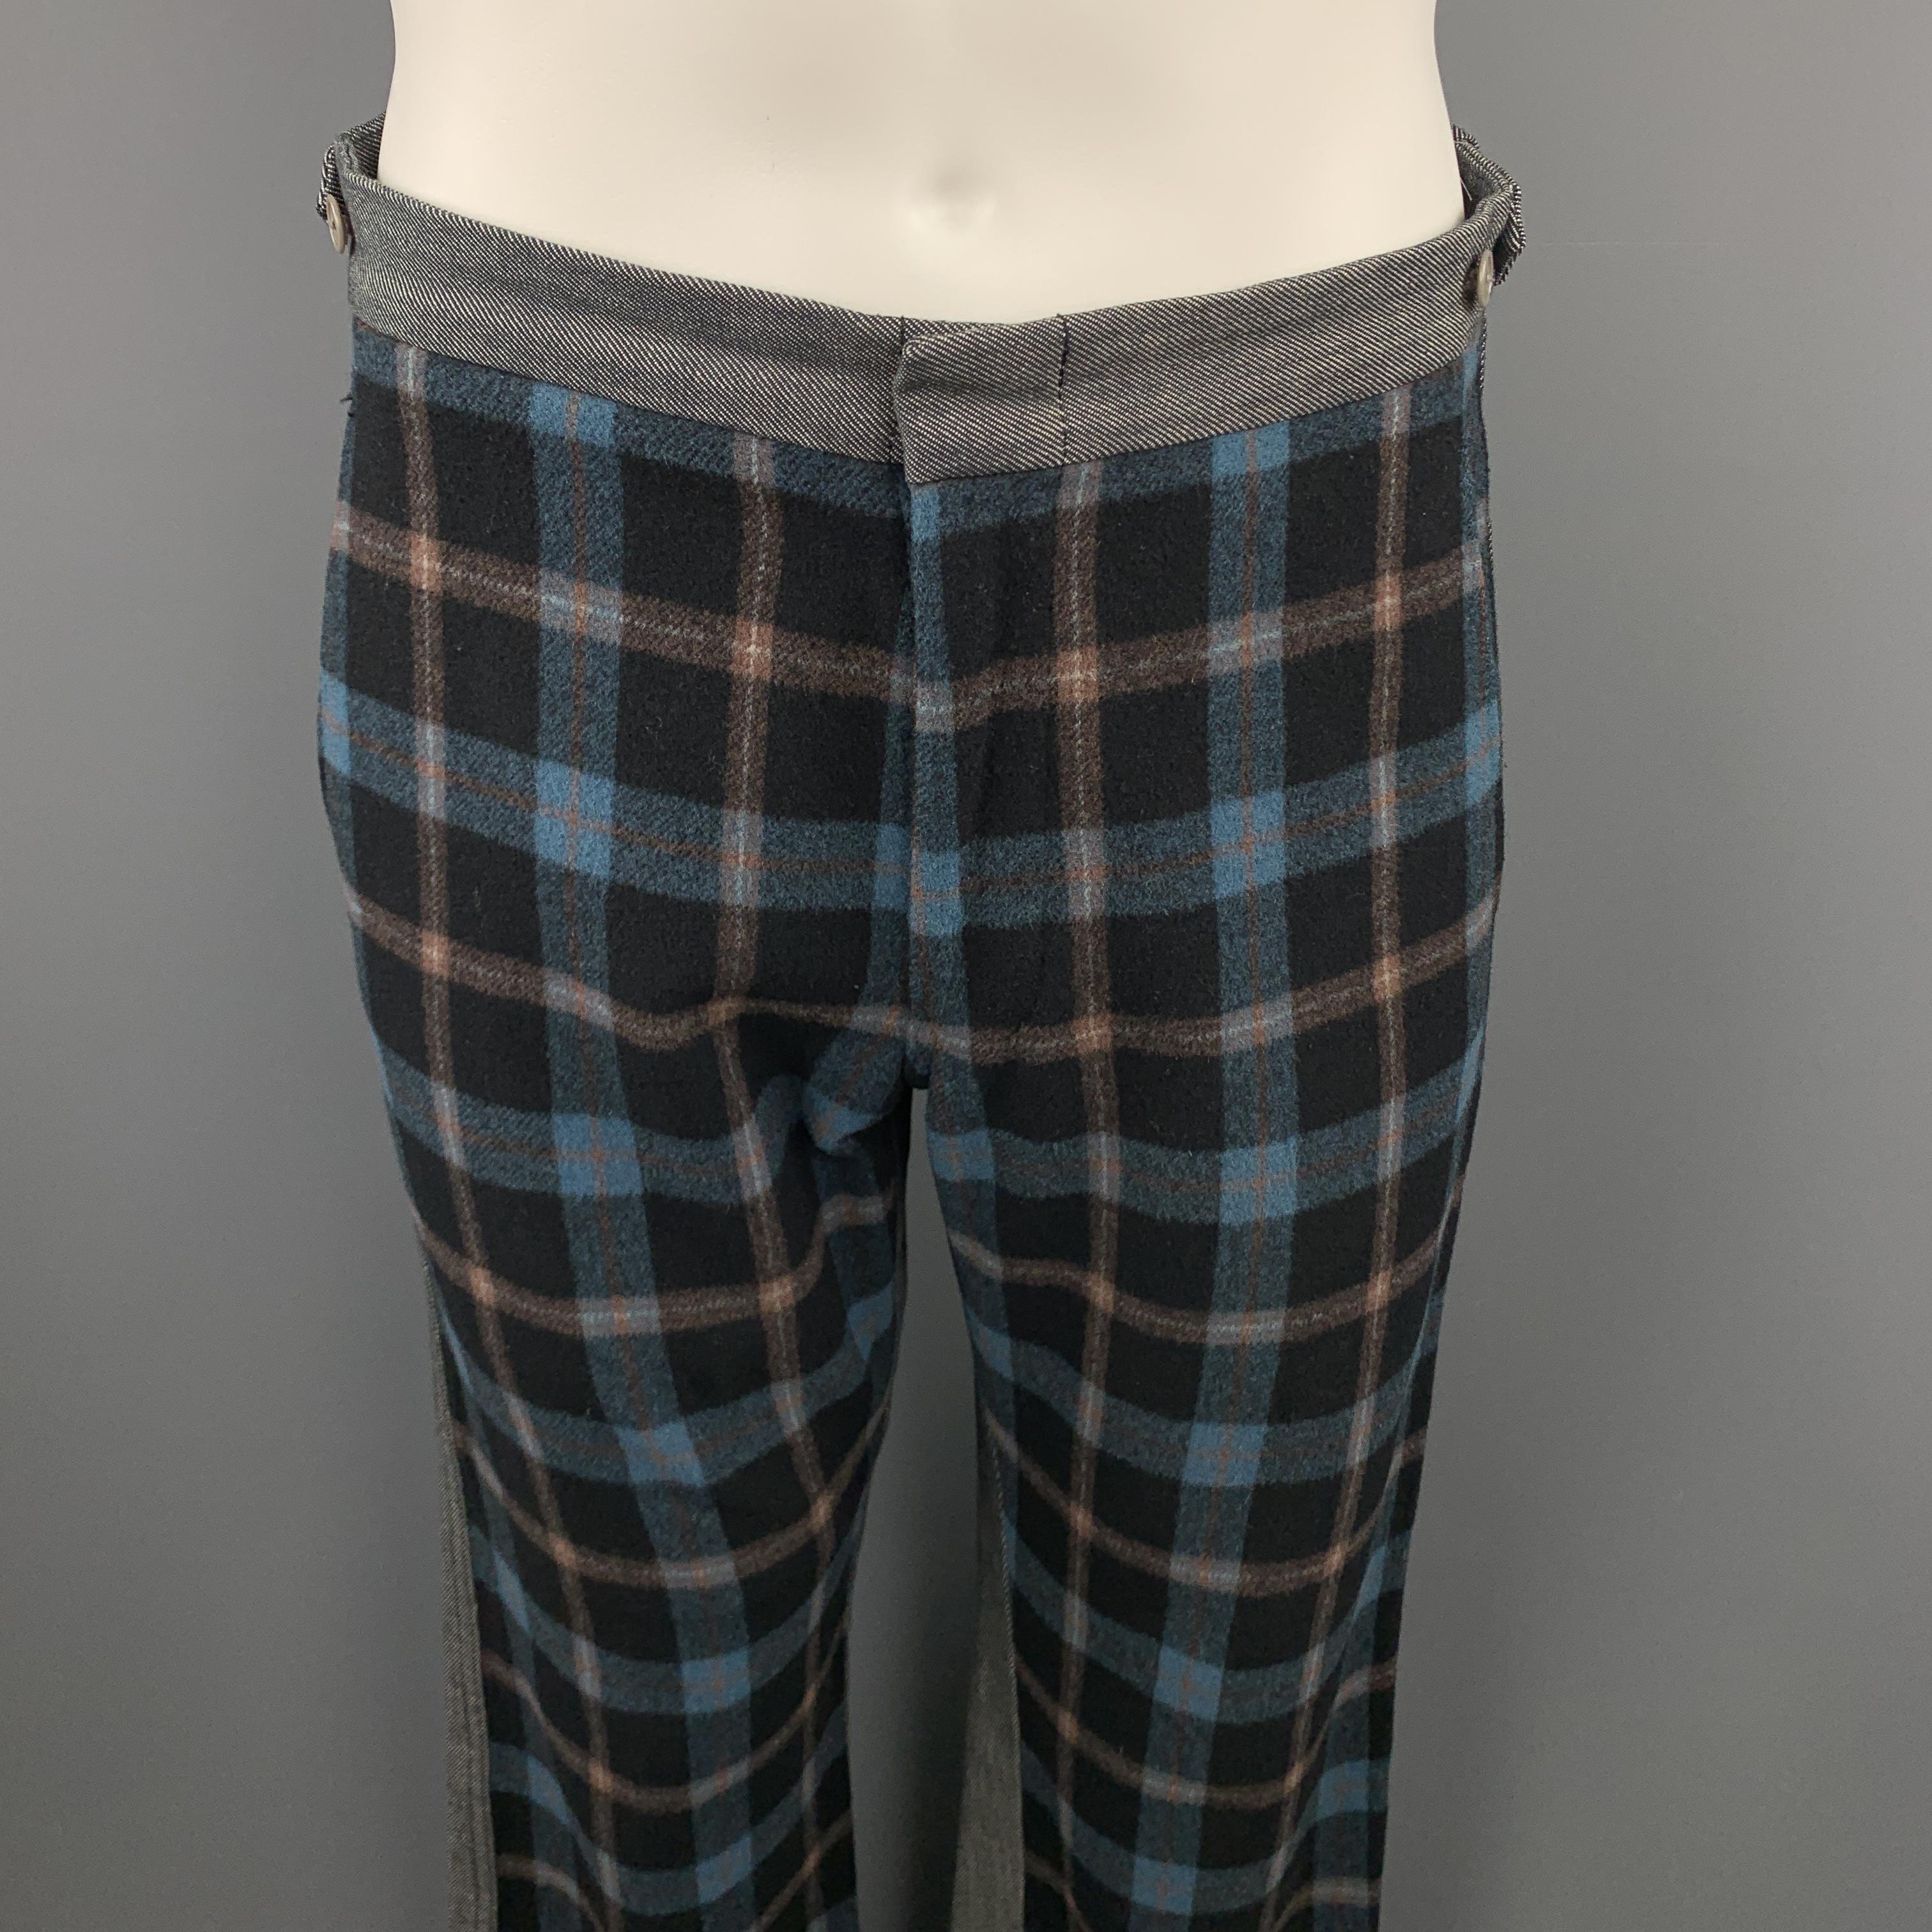 Archive COMME des GARCONS HOMME PLUS pants come in gray denim with side tabs, and navy, blue, and brown plaid wool blend front. Made in Japan.

Excellent Pre-Owned Condition.
Marked: M

Measurements:

Waist: 32.5 in.
Rise: 11.5 in.
Inseam: 32 in.